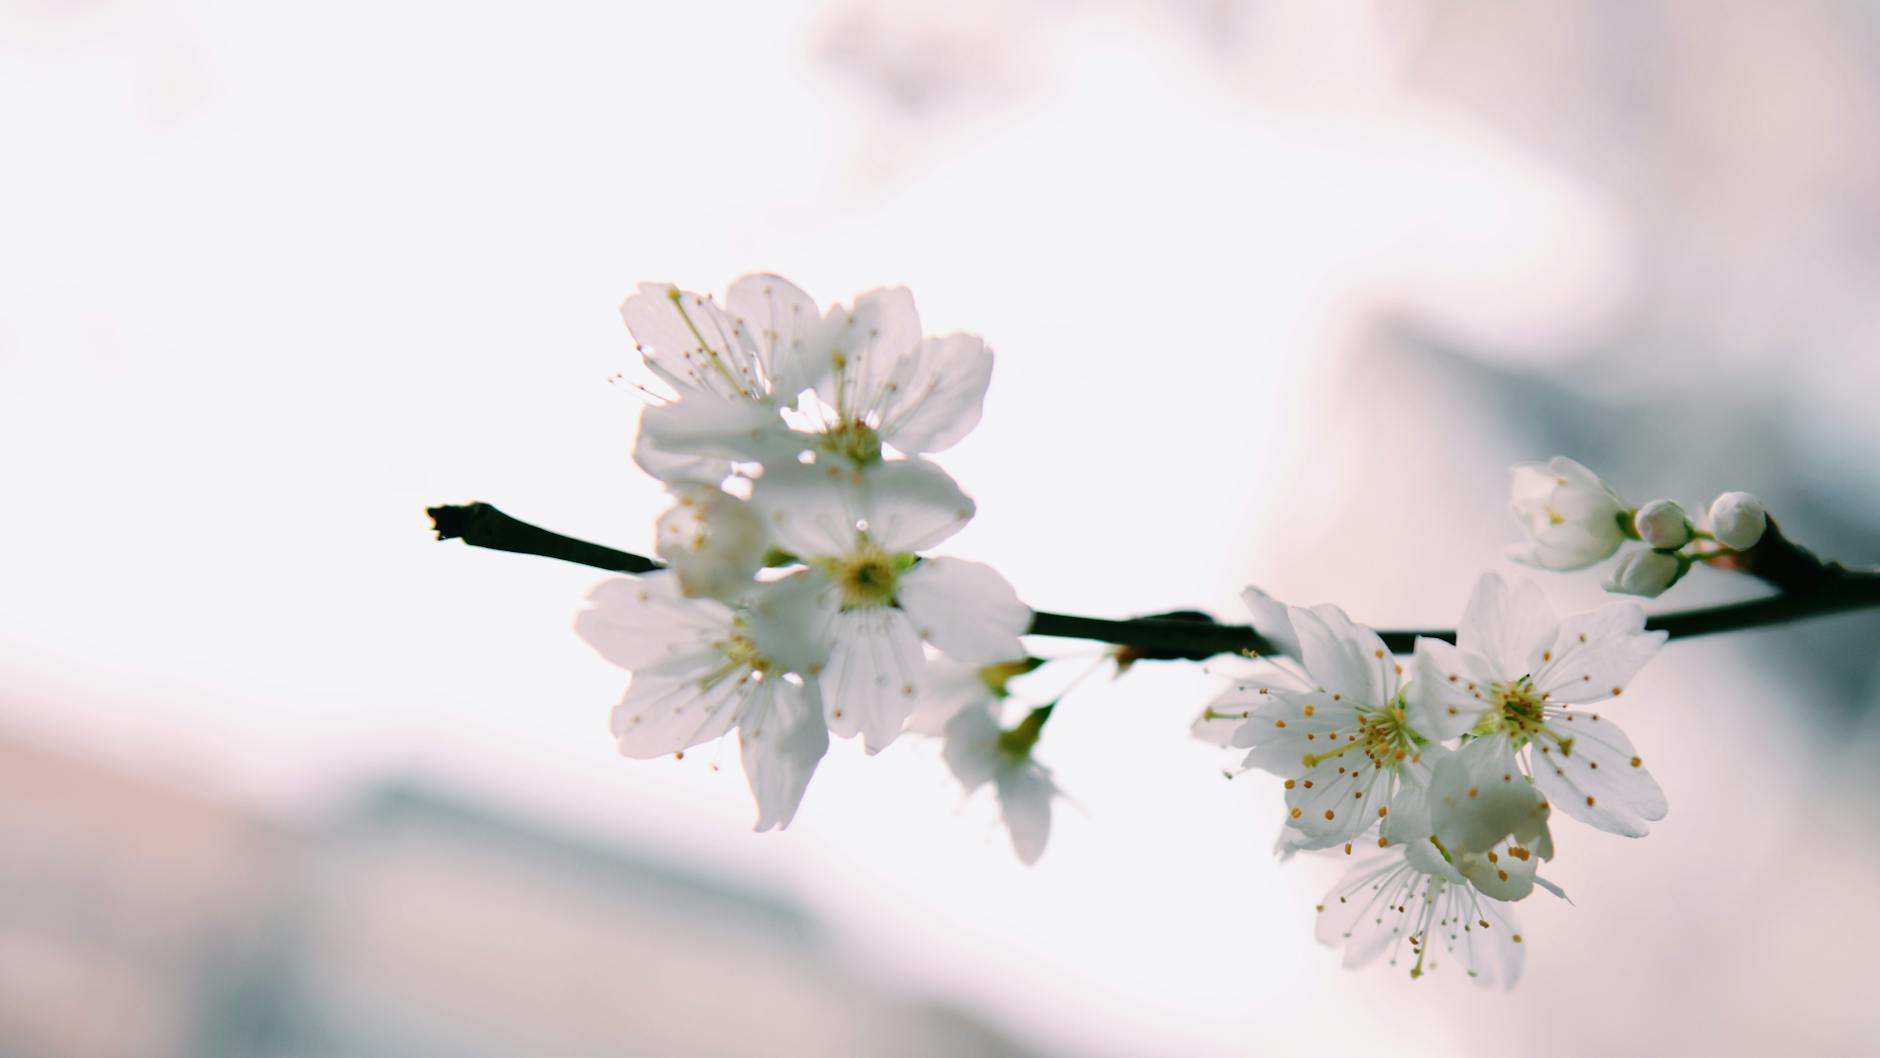 White plum blossoms on a black twig. 